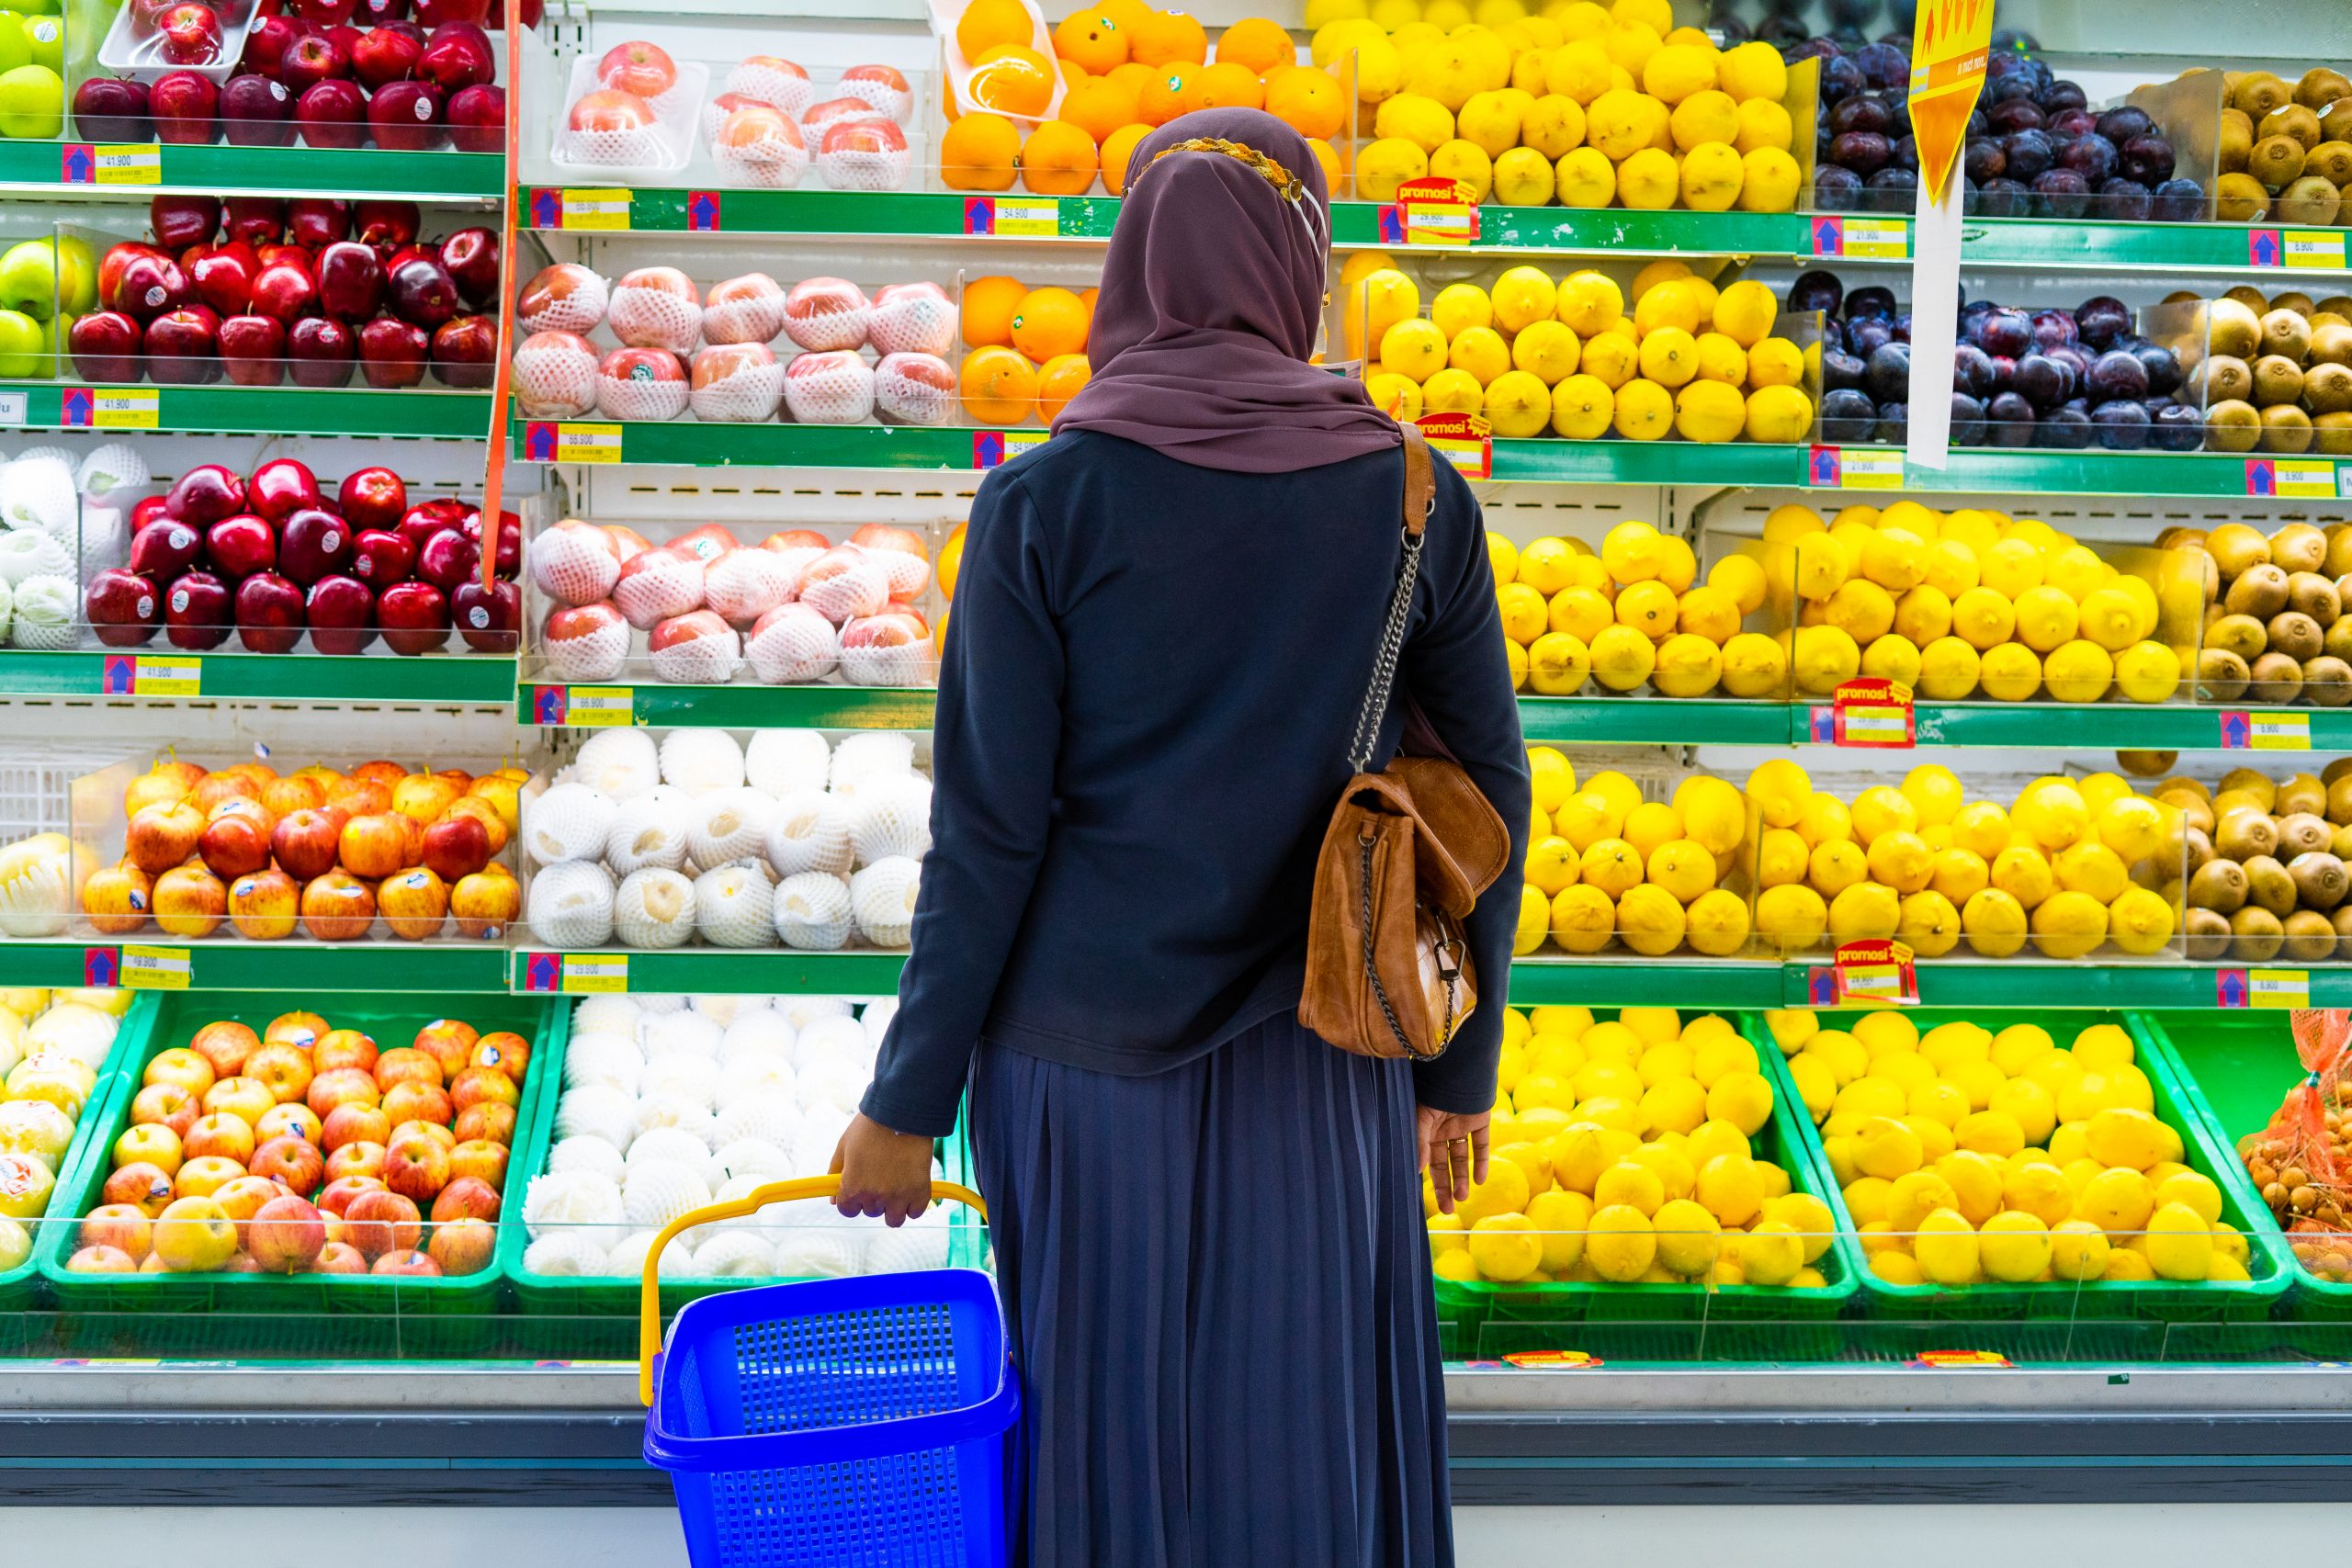 A refugee in the produce aisle of the grocery store